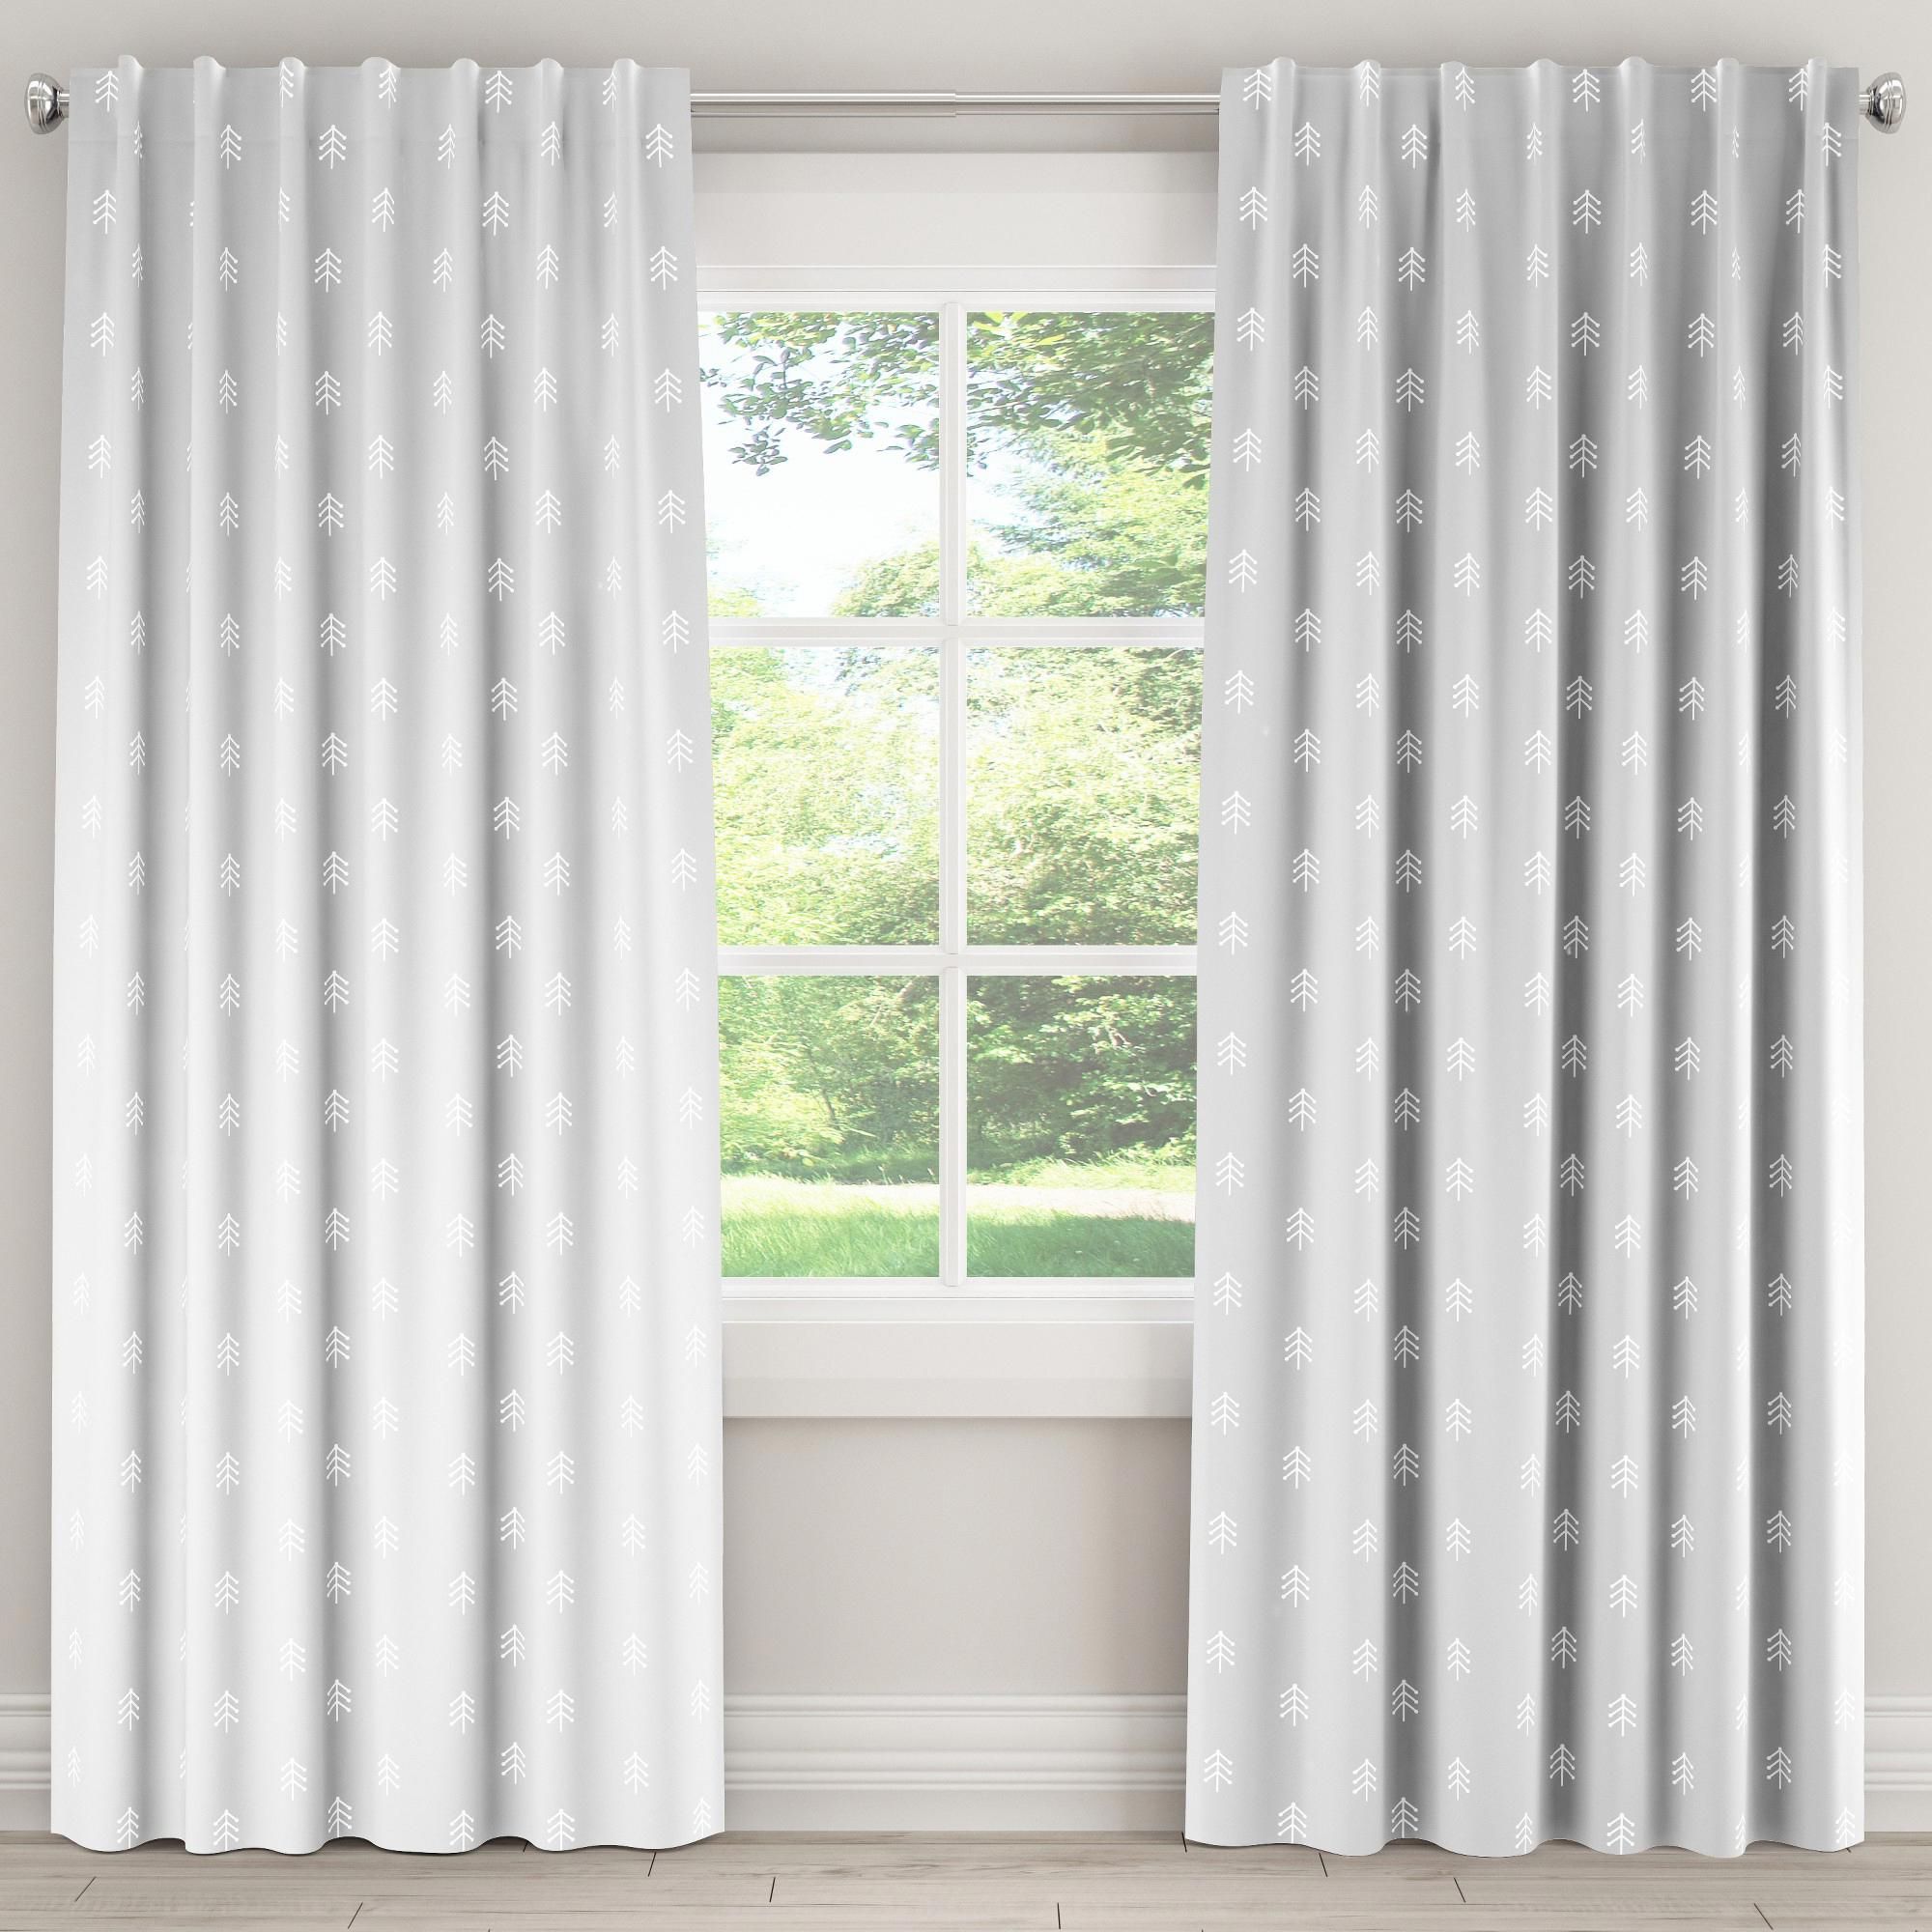 The Curated Nomad Duane Blackout Curtain Panel Pairs For Well Liked Blackout Curtain Line Tree Grey 84l – Skyline Furniture (View 15 of 20)